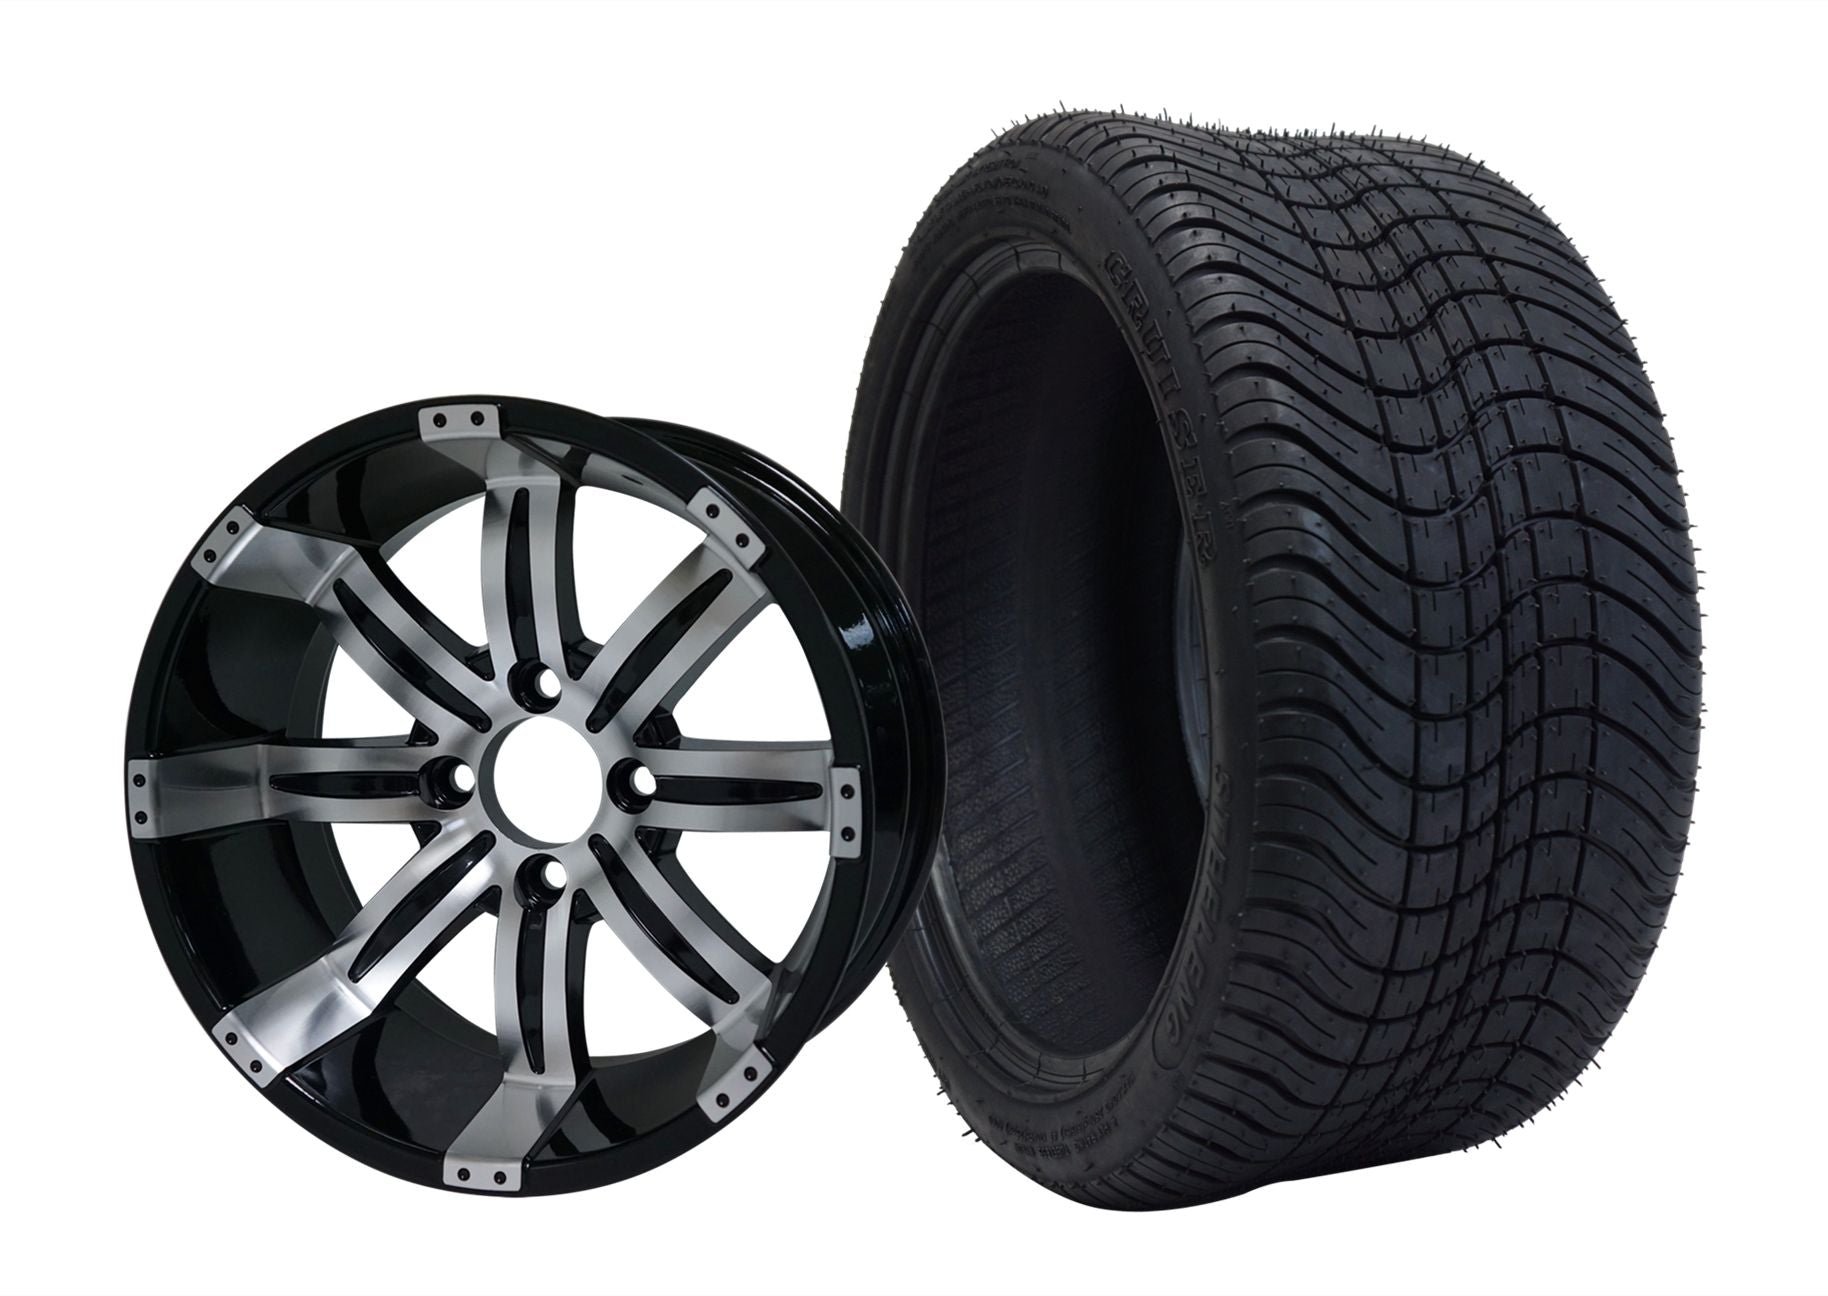 SGC 14" x 7" Tempest Machined/Black Wheel - Aluminum AlloySTEELENG 205/30-14 Low Profile Tire DOT approved WH1406-TR1404